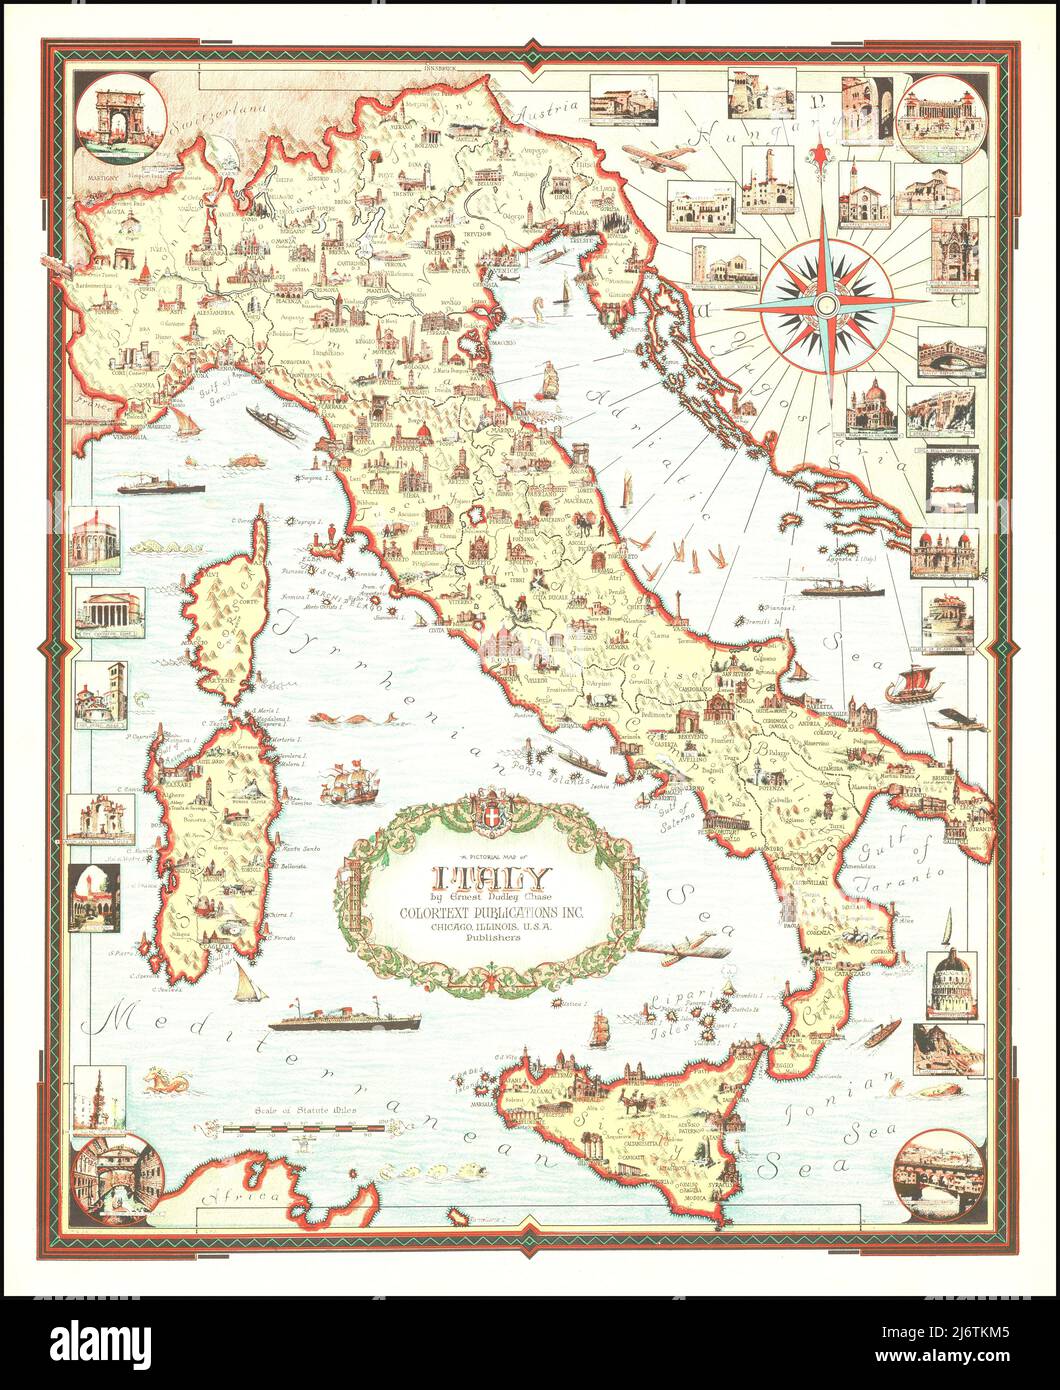 Ernest Dudley Chase - Pictorial Map of Italy - 1935 Stock Photo